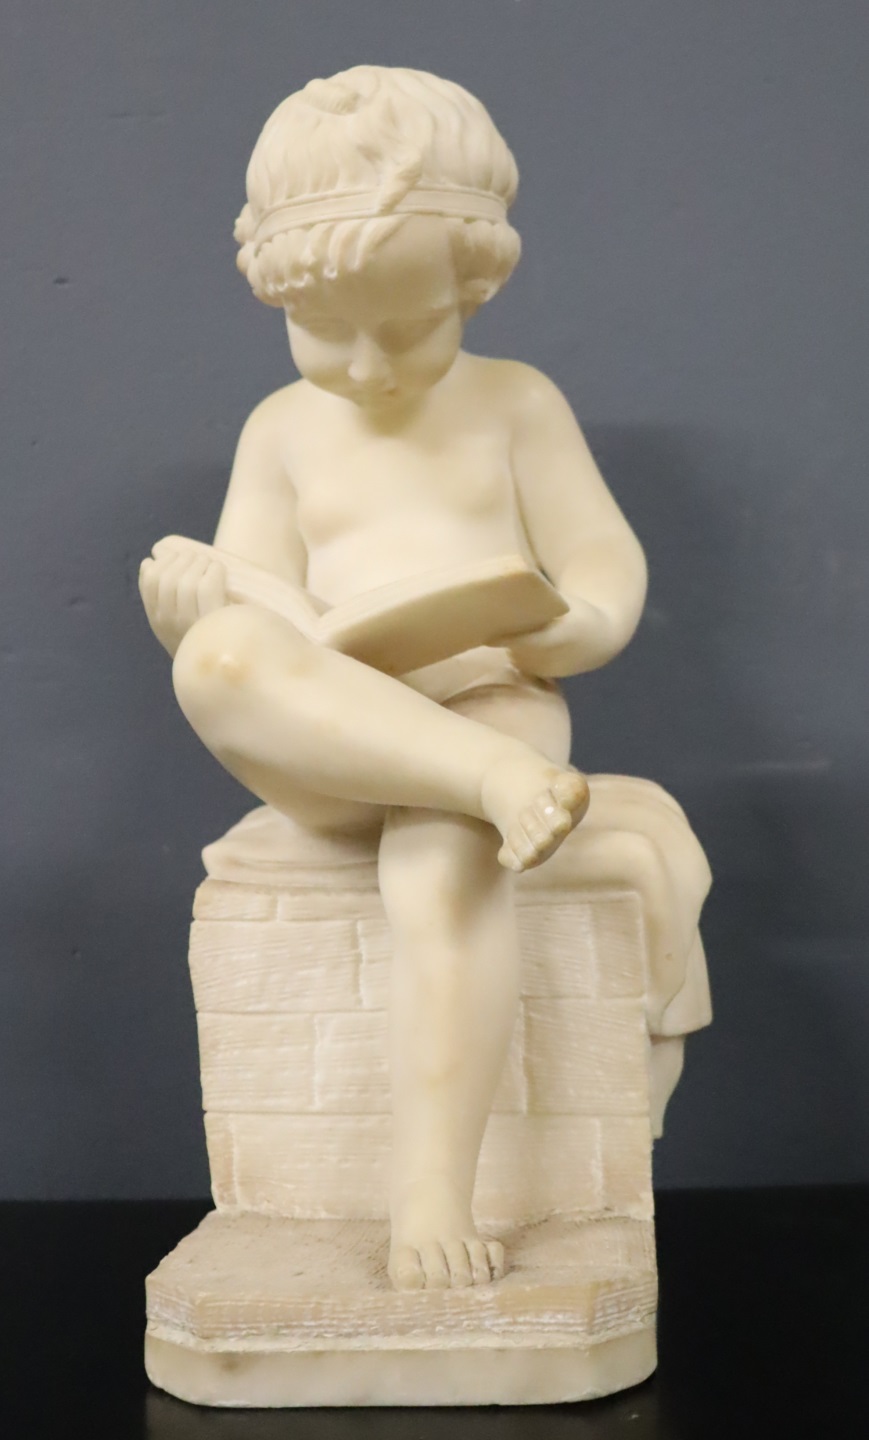 UNSIGNED MARBLE SCULPTURE OF A